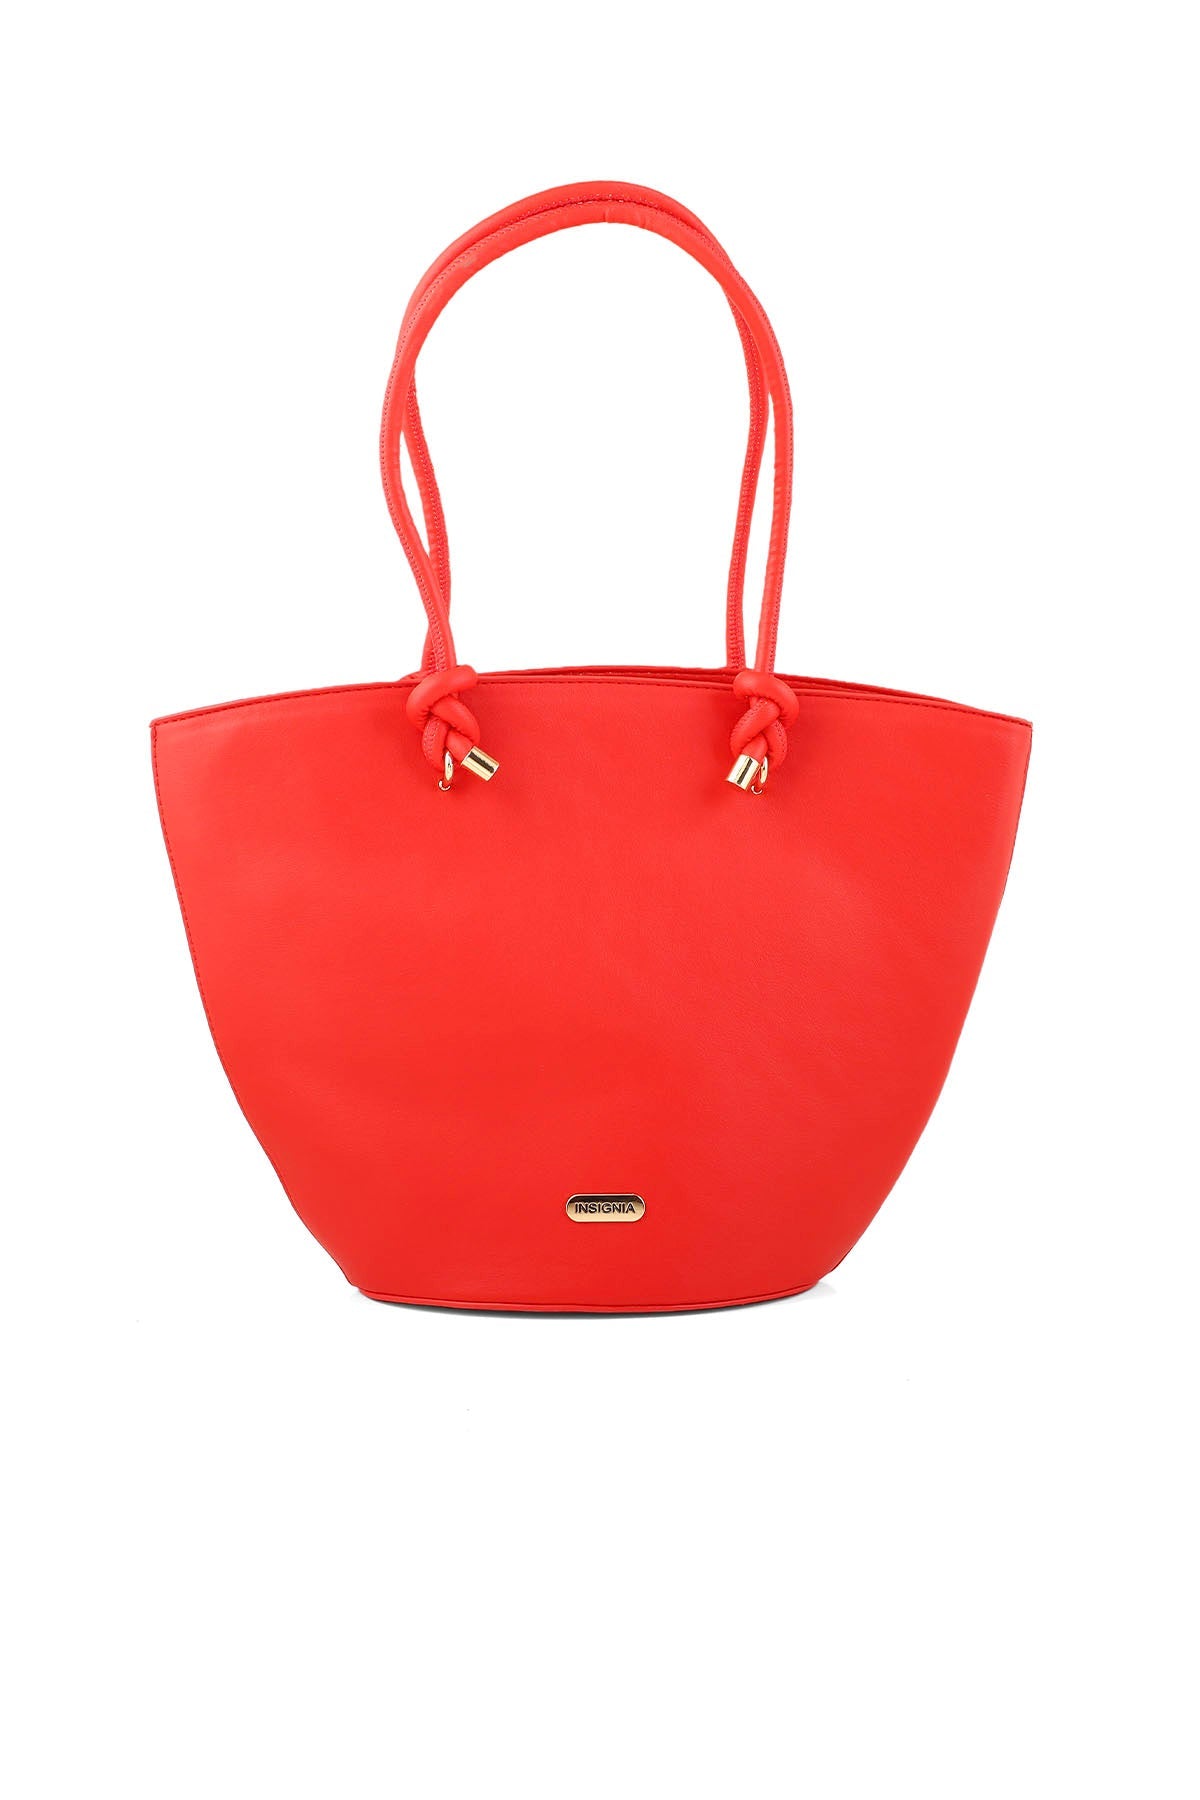 Bucket Hand Bags B15077-Red